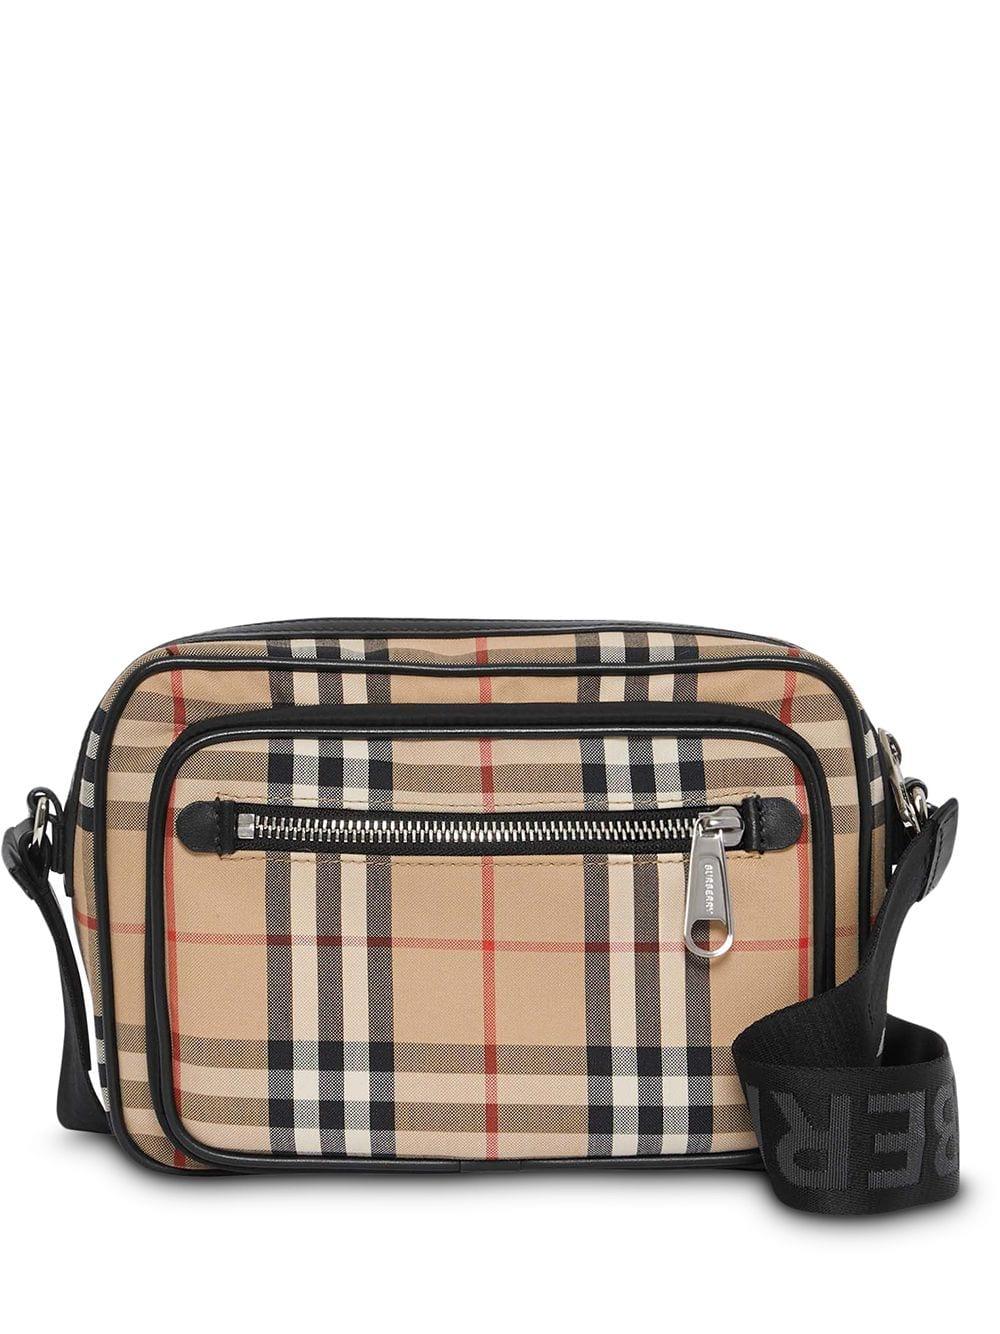 Burberry Vintage Check Leather Crossbody Bag for Men - Lyst